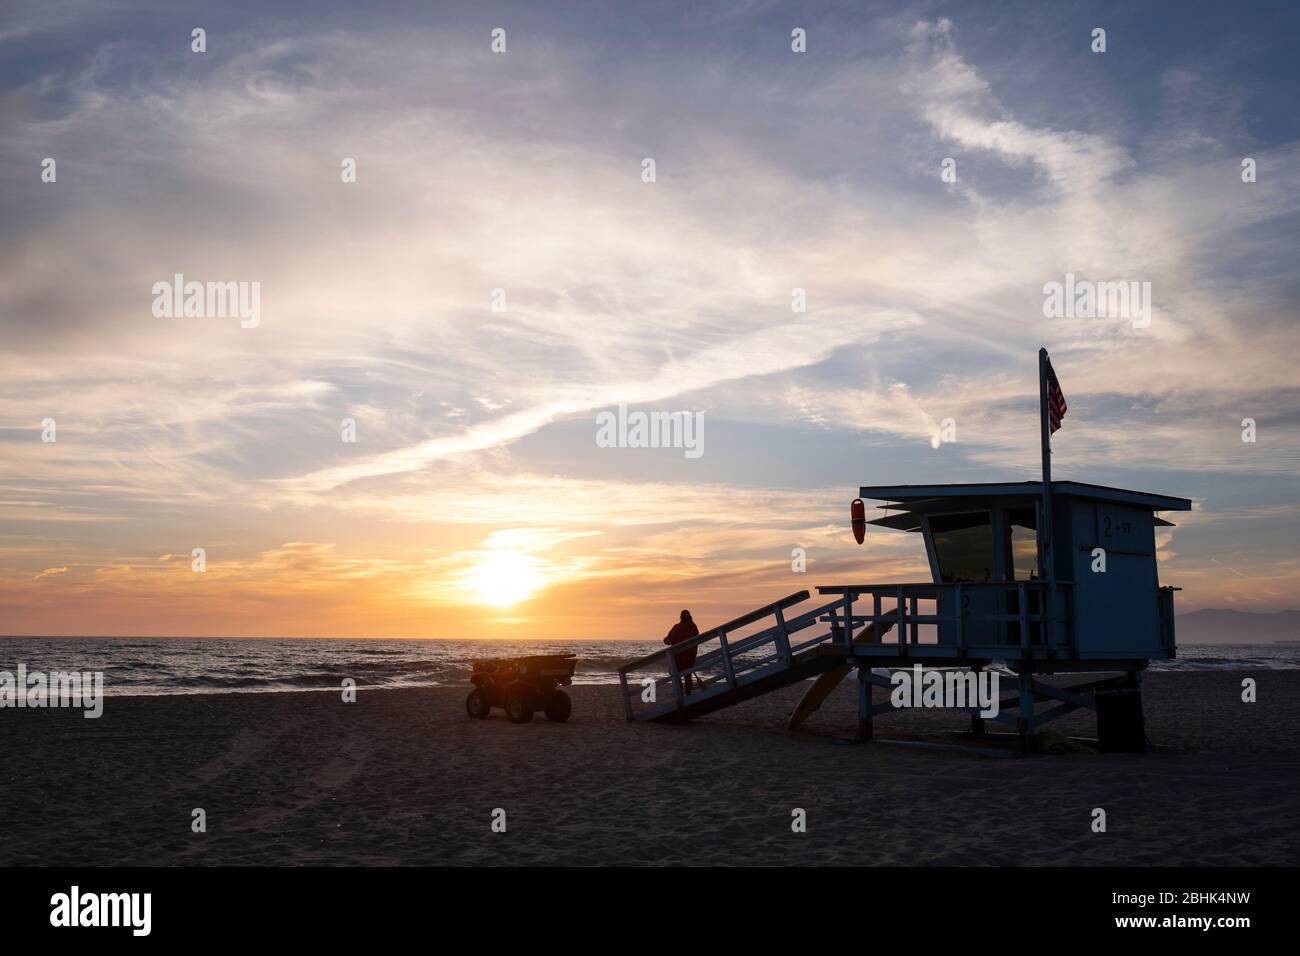 sunset over the Pacific coast with the silhouette of a lifeguard tower in Hermosa Beach, California Stock Photo